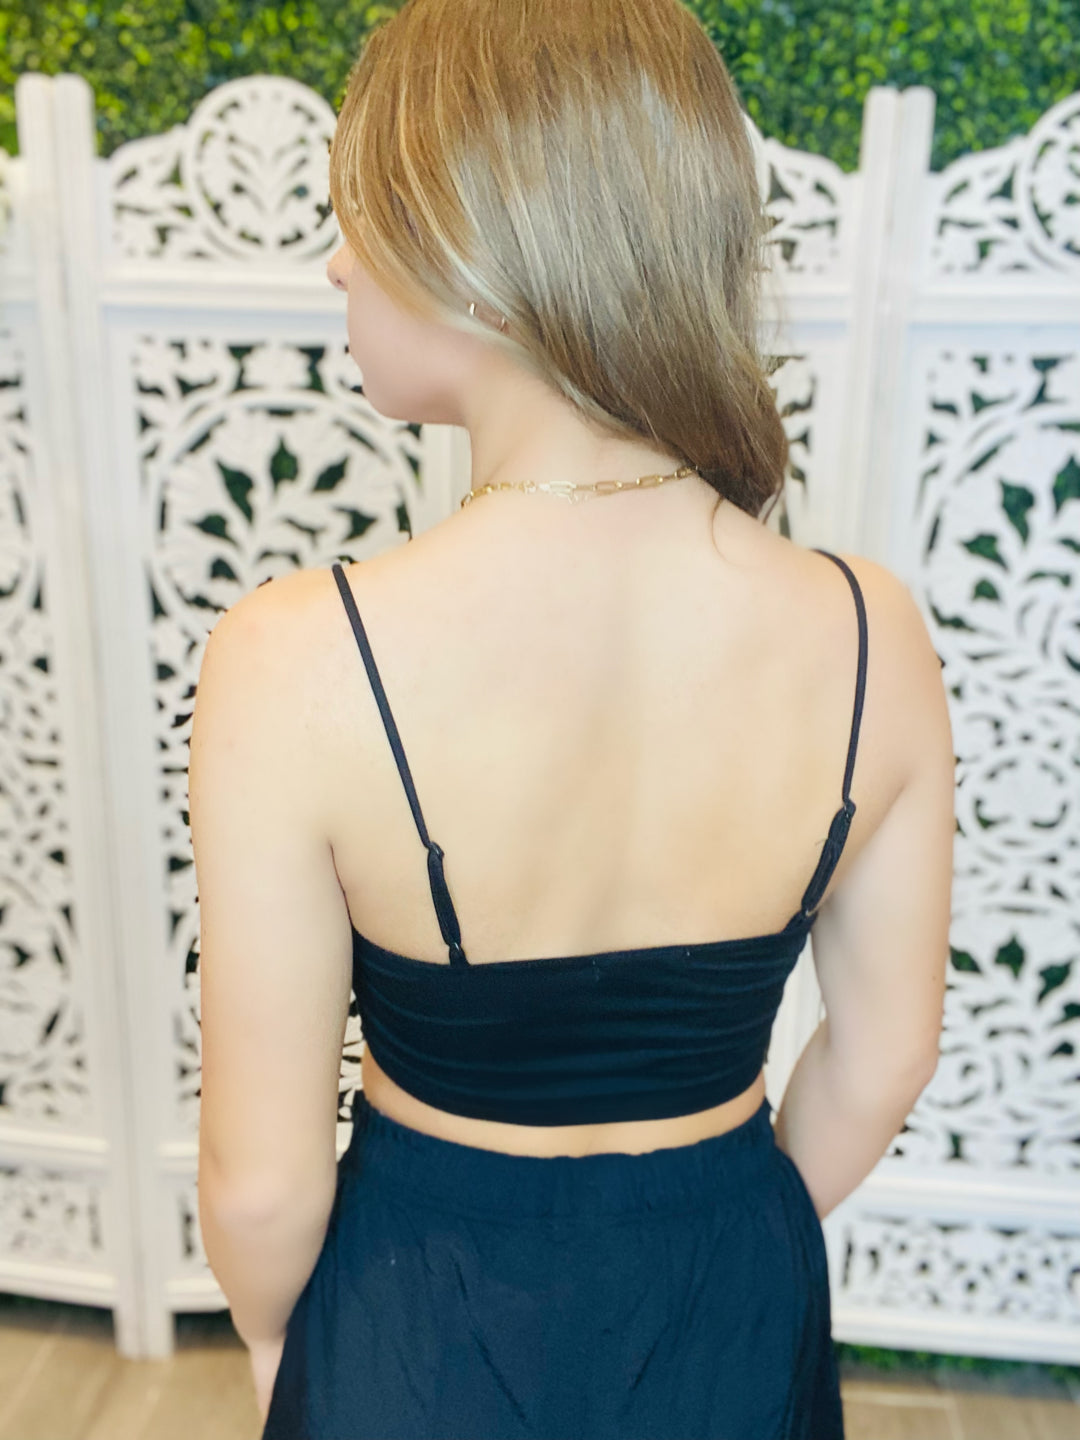 Back View. LIBERTY V-Style Spaghetti Strap Crop Top-Crop Top-Style Up-Malandra Boutique, Women's Fashion Boutique Located in Las Vegas, NV